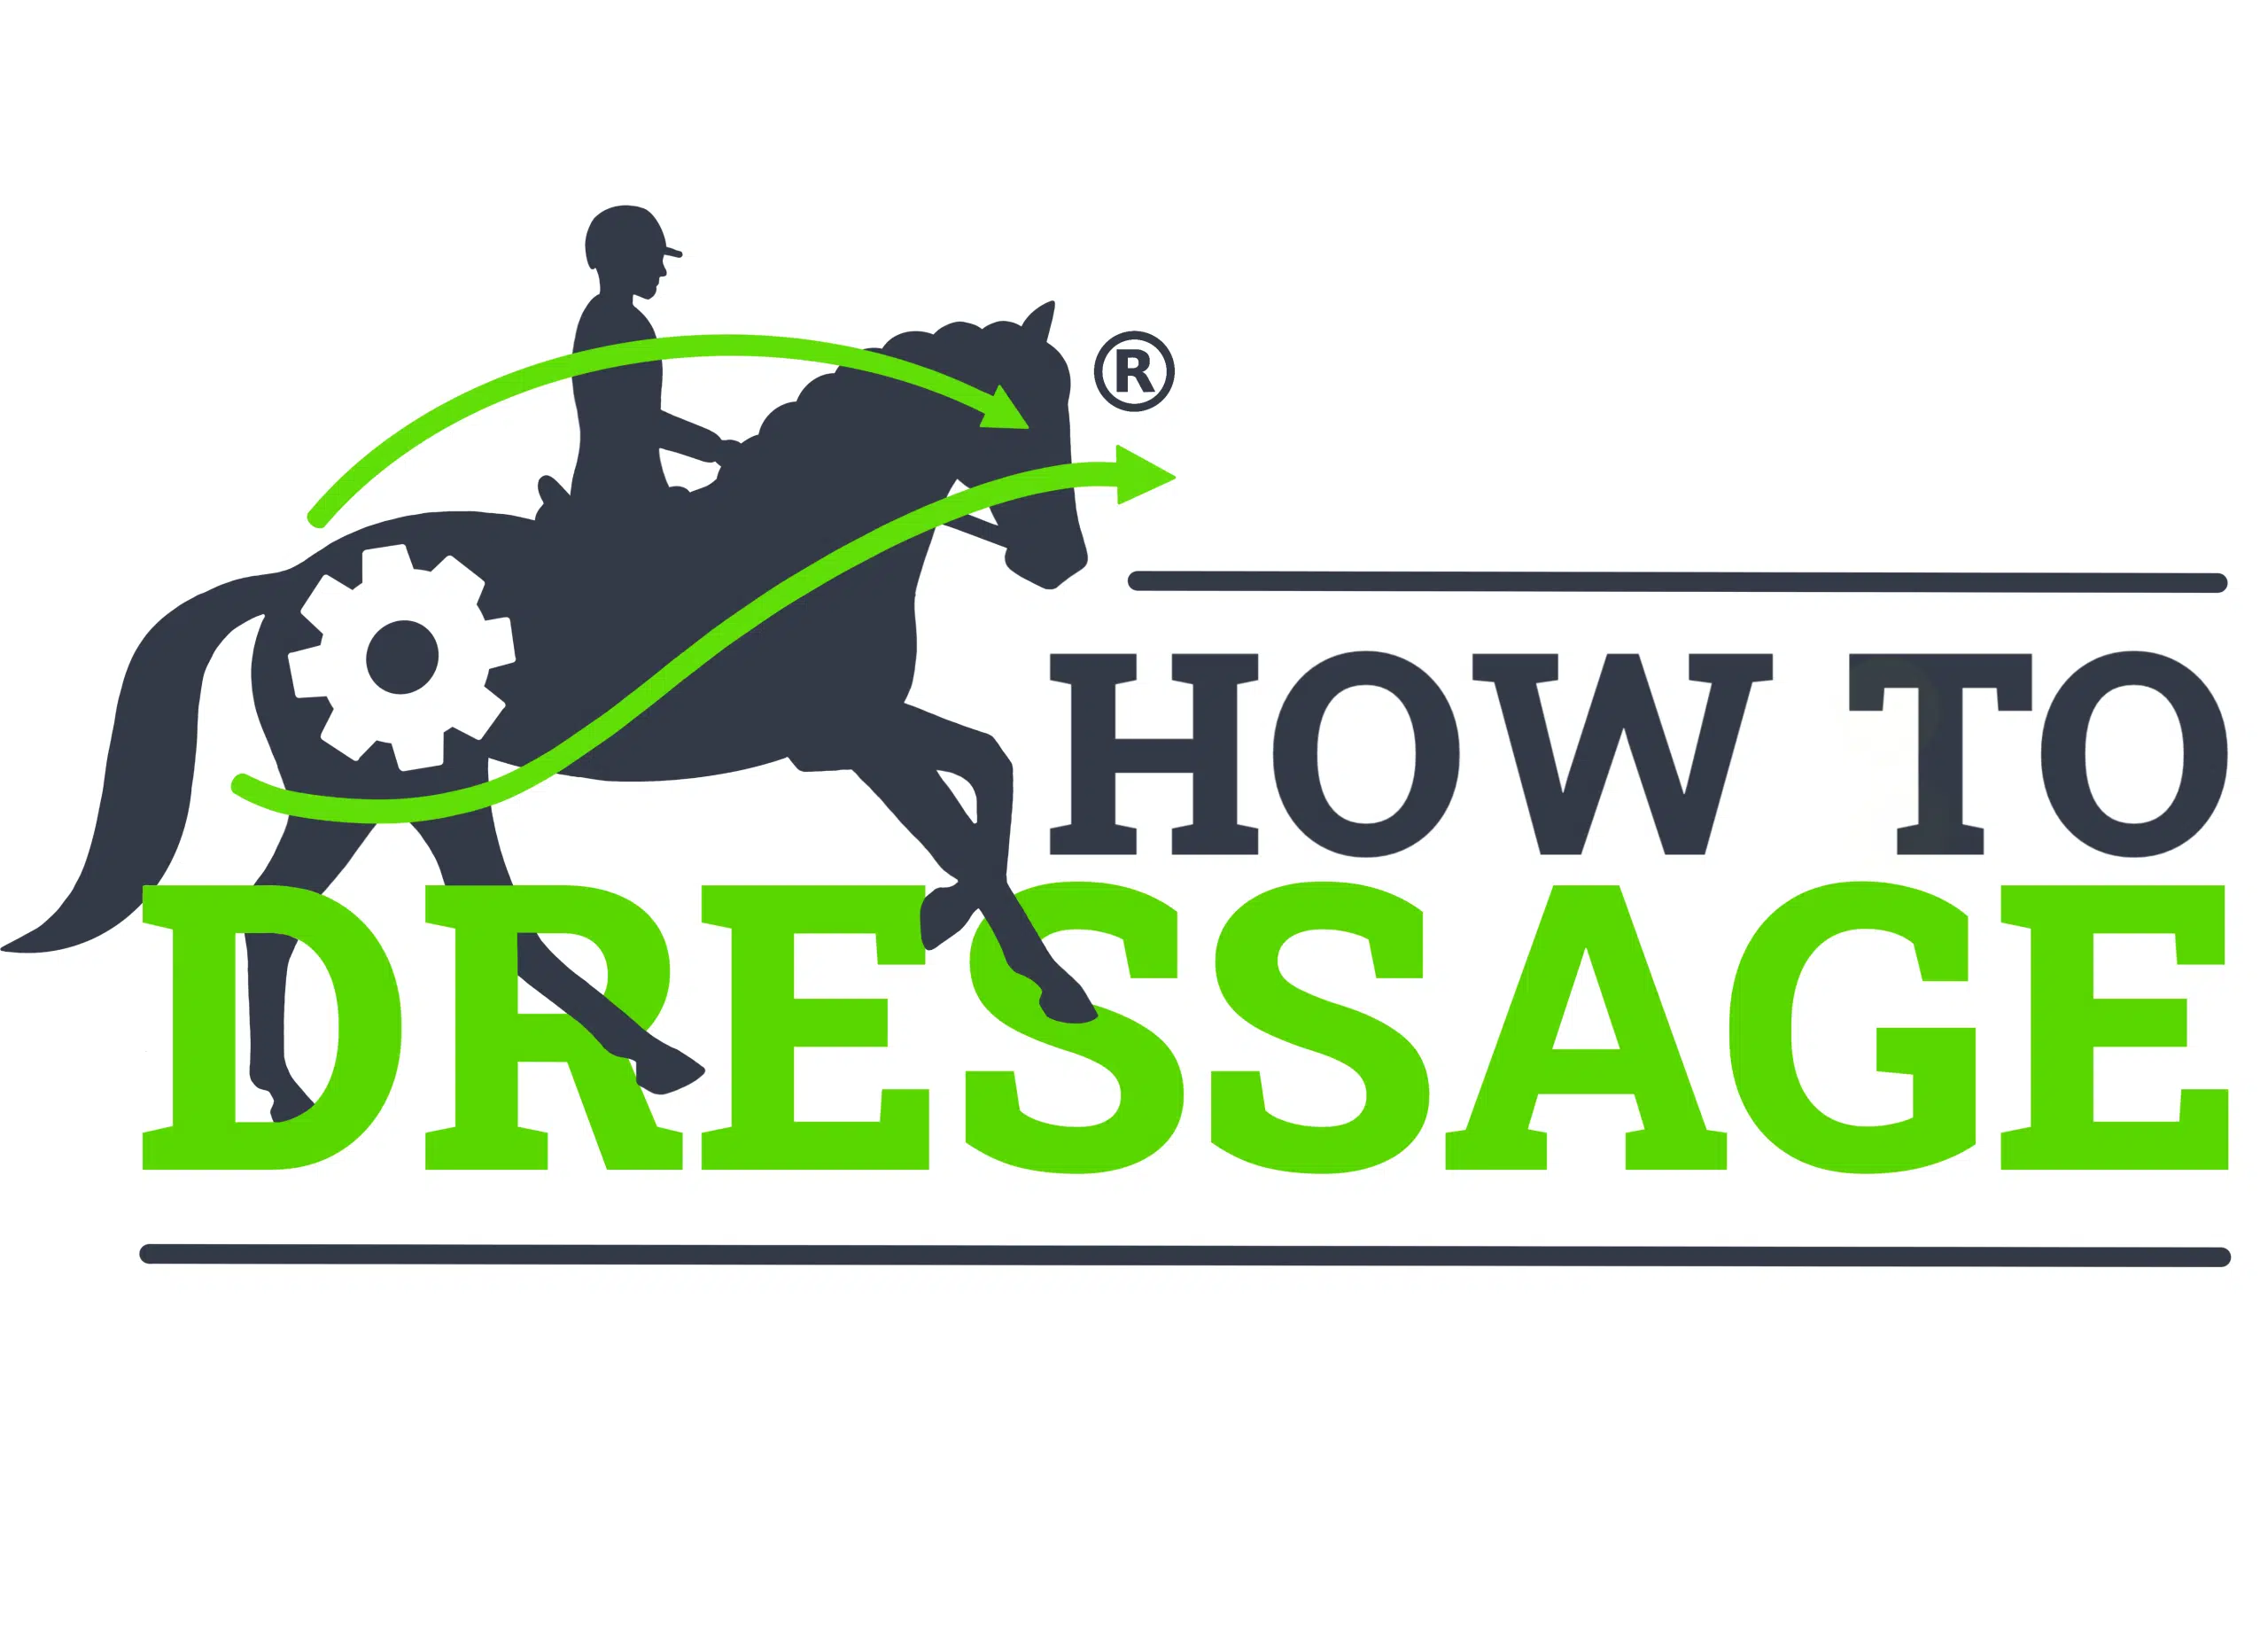 How To Dressage New Logo